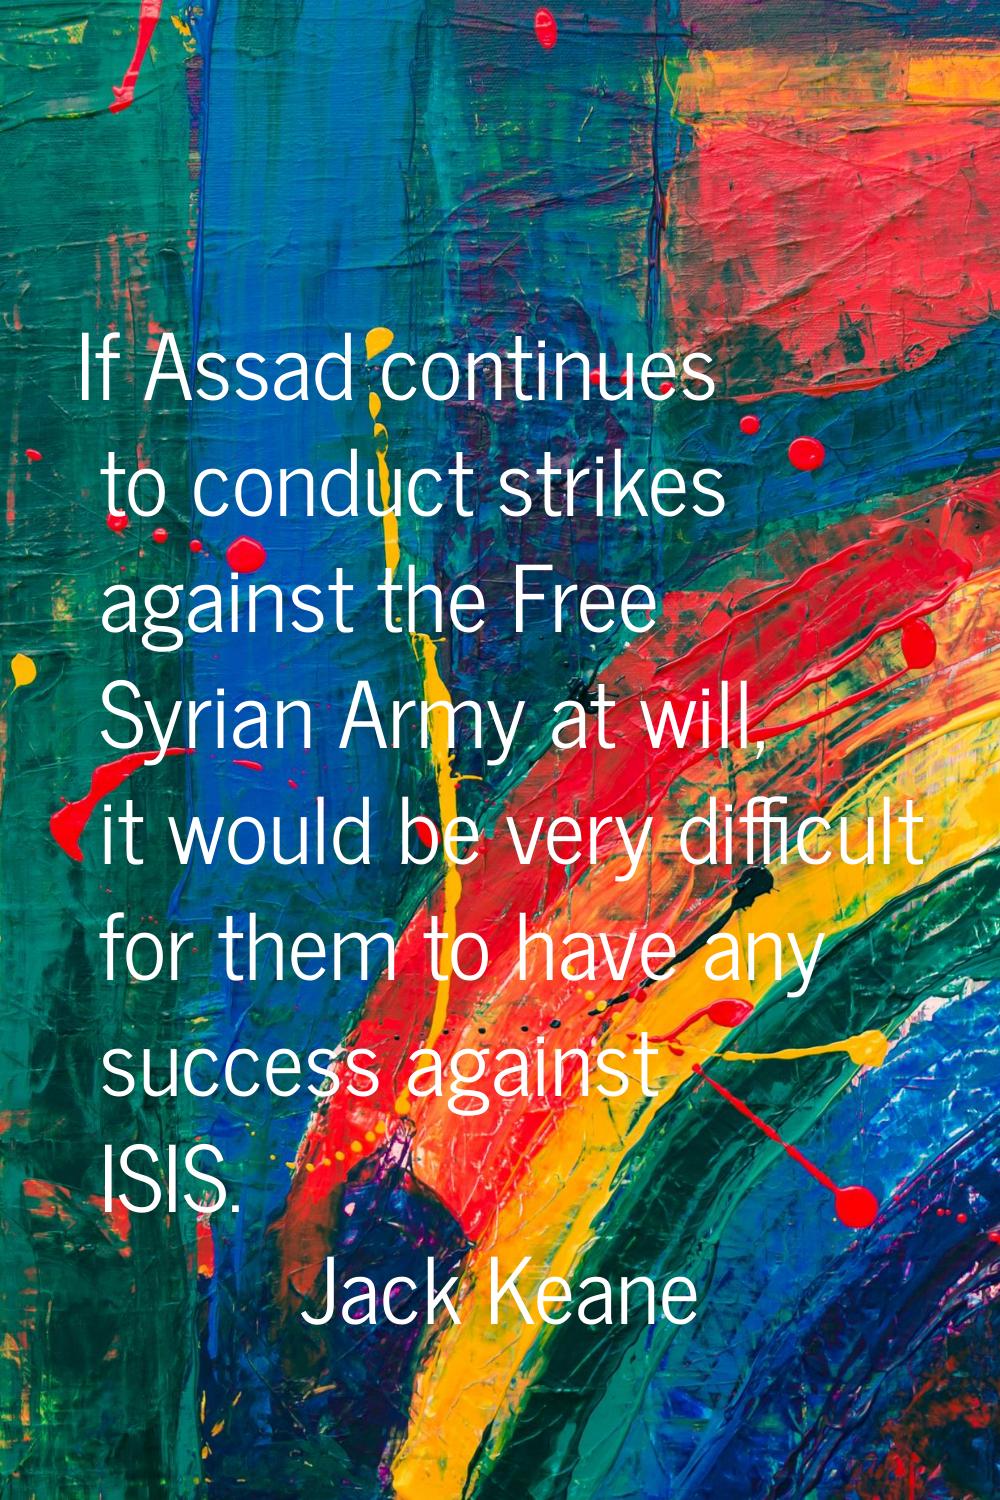 If Assad continues to conduct strikes against the Free Syrian Army at will, it would be very diffic